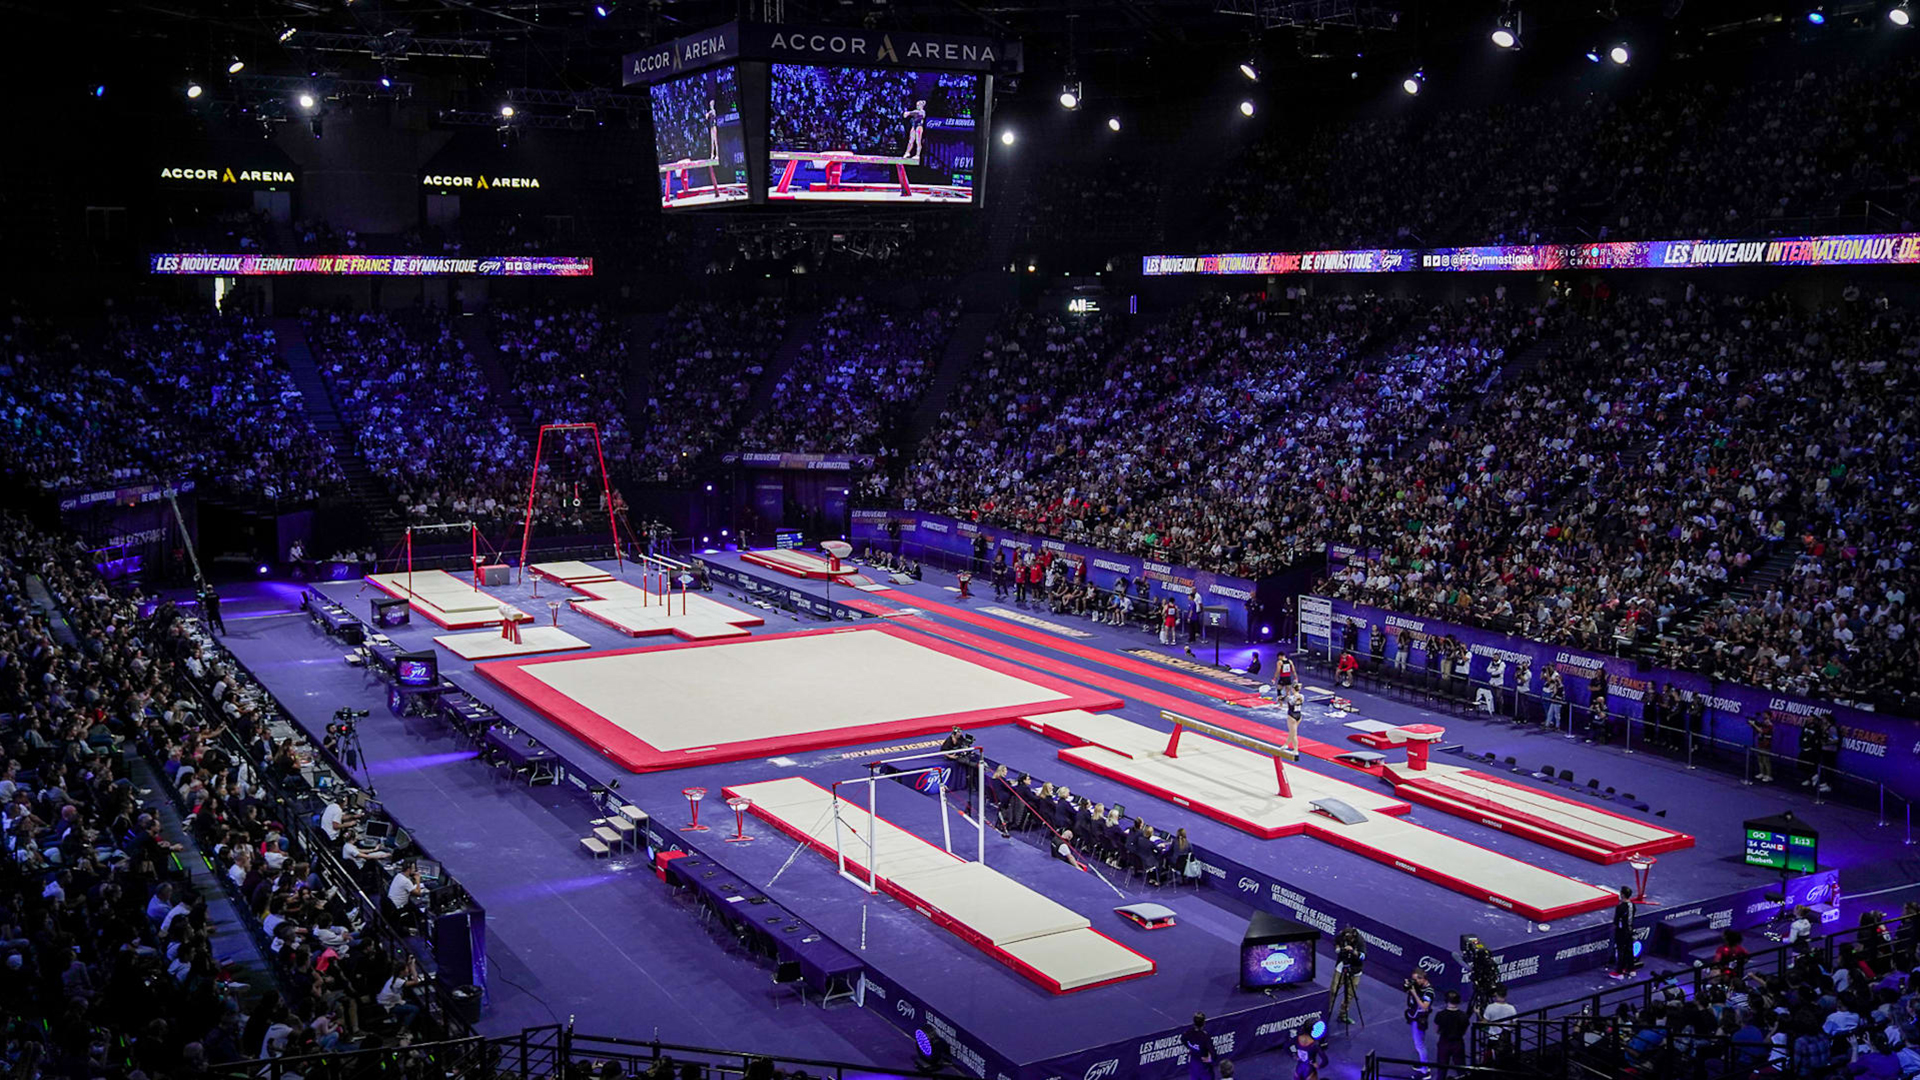 From Varna to Paris Bercy: The World Cups Challenge in gymnastics begin